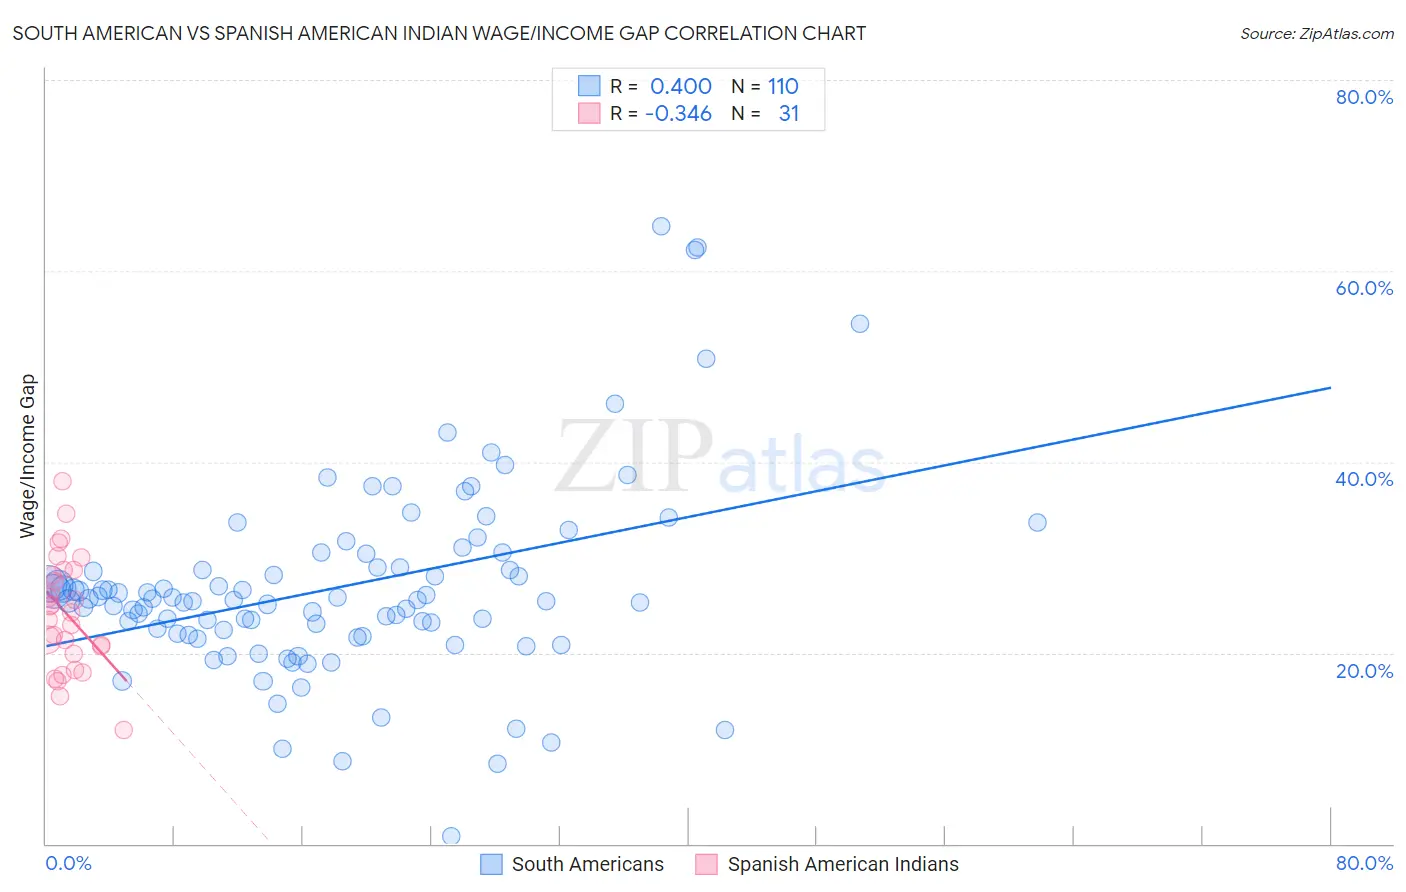 South American vs Spanish American Indian Wage/Income Gap